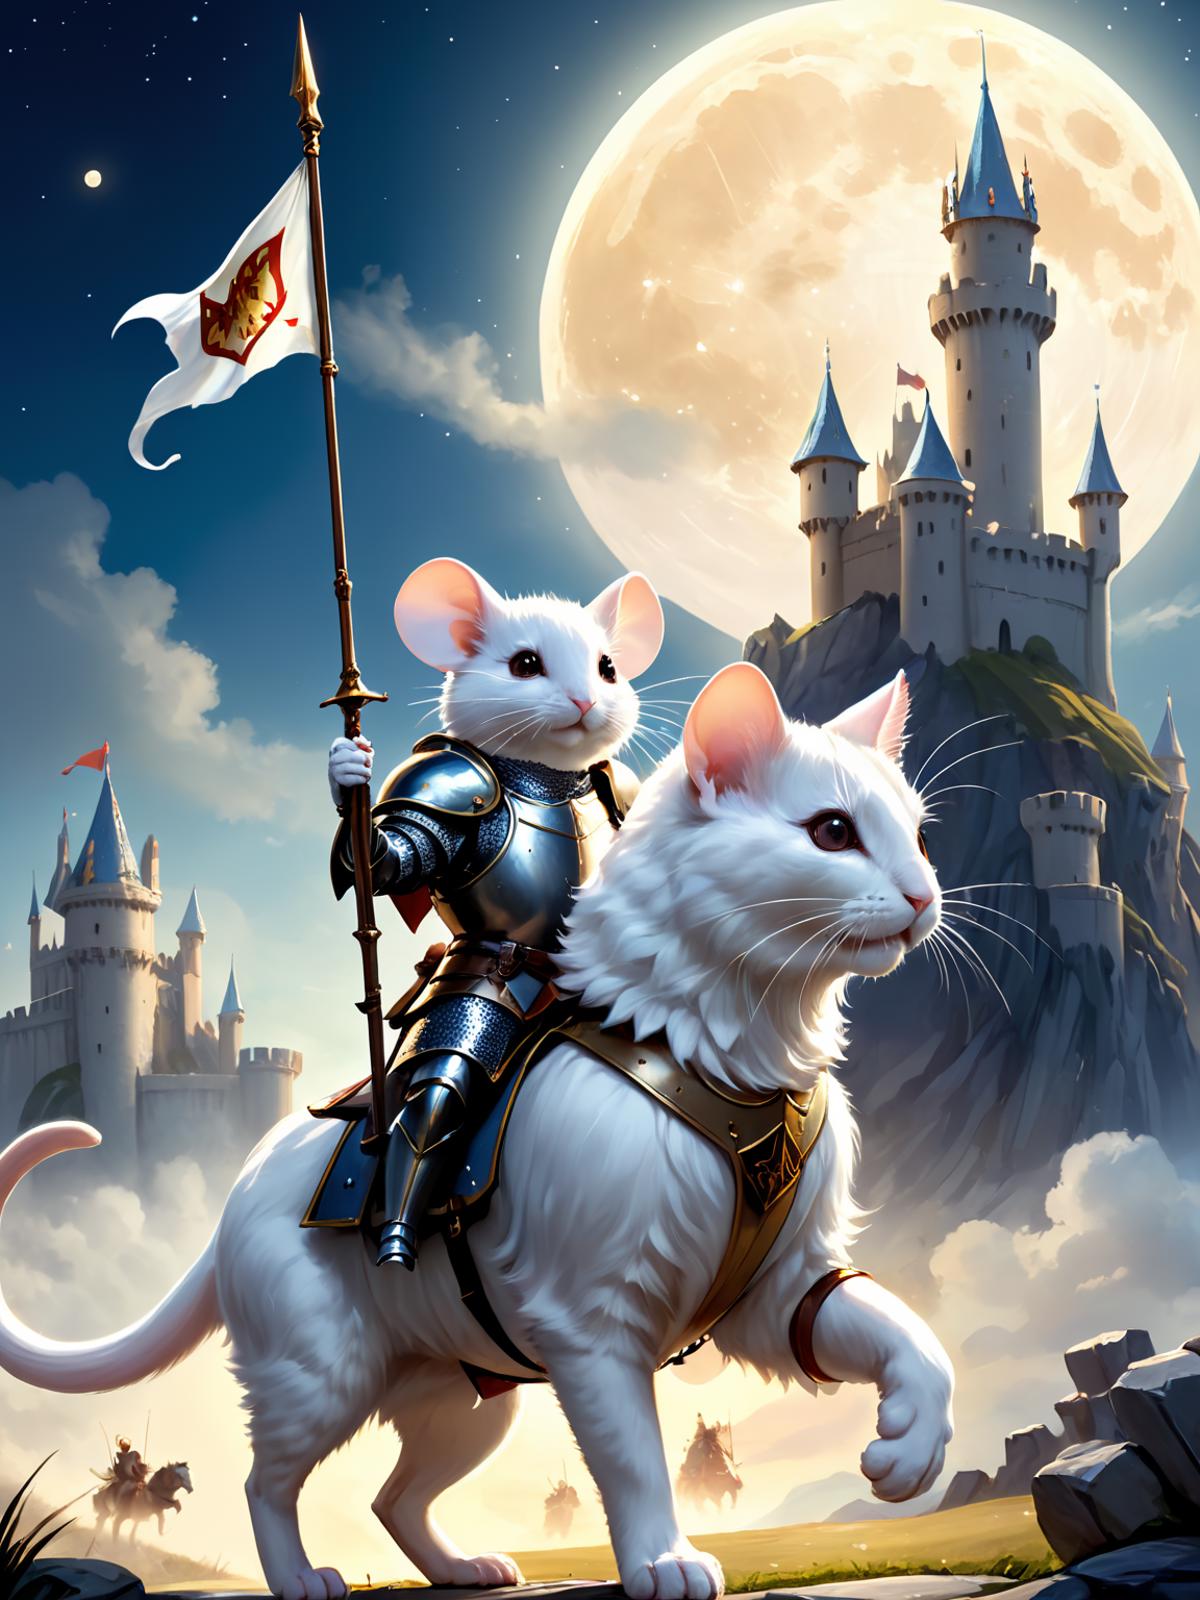 A painting of a knight riding on a cat with a castle in the background.